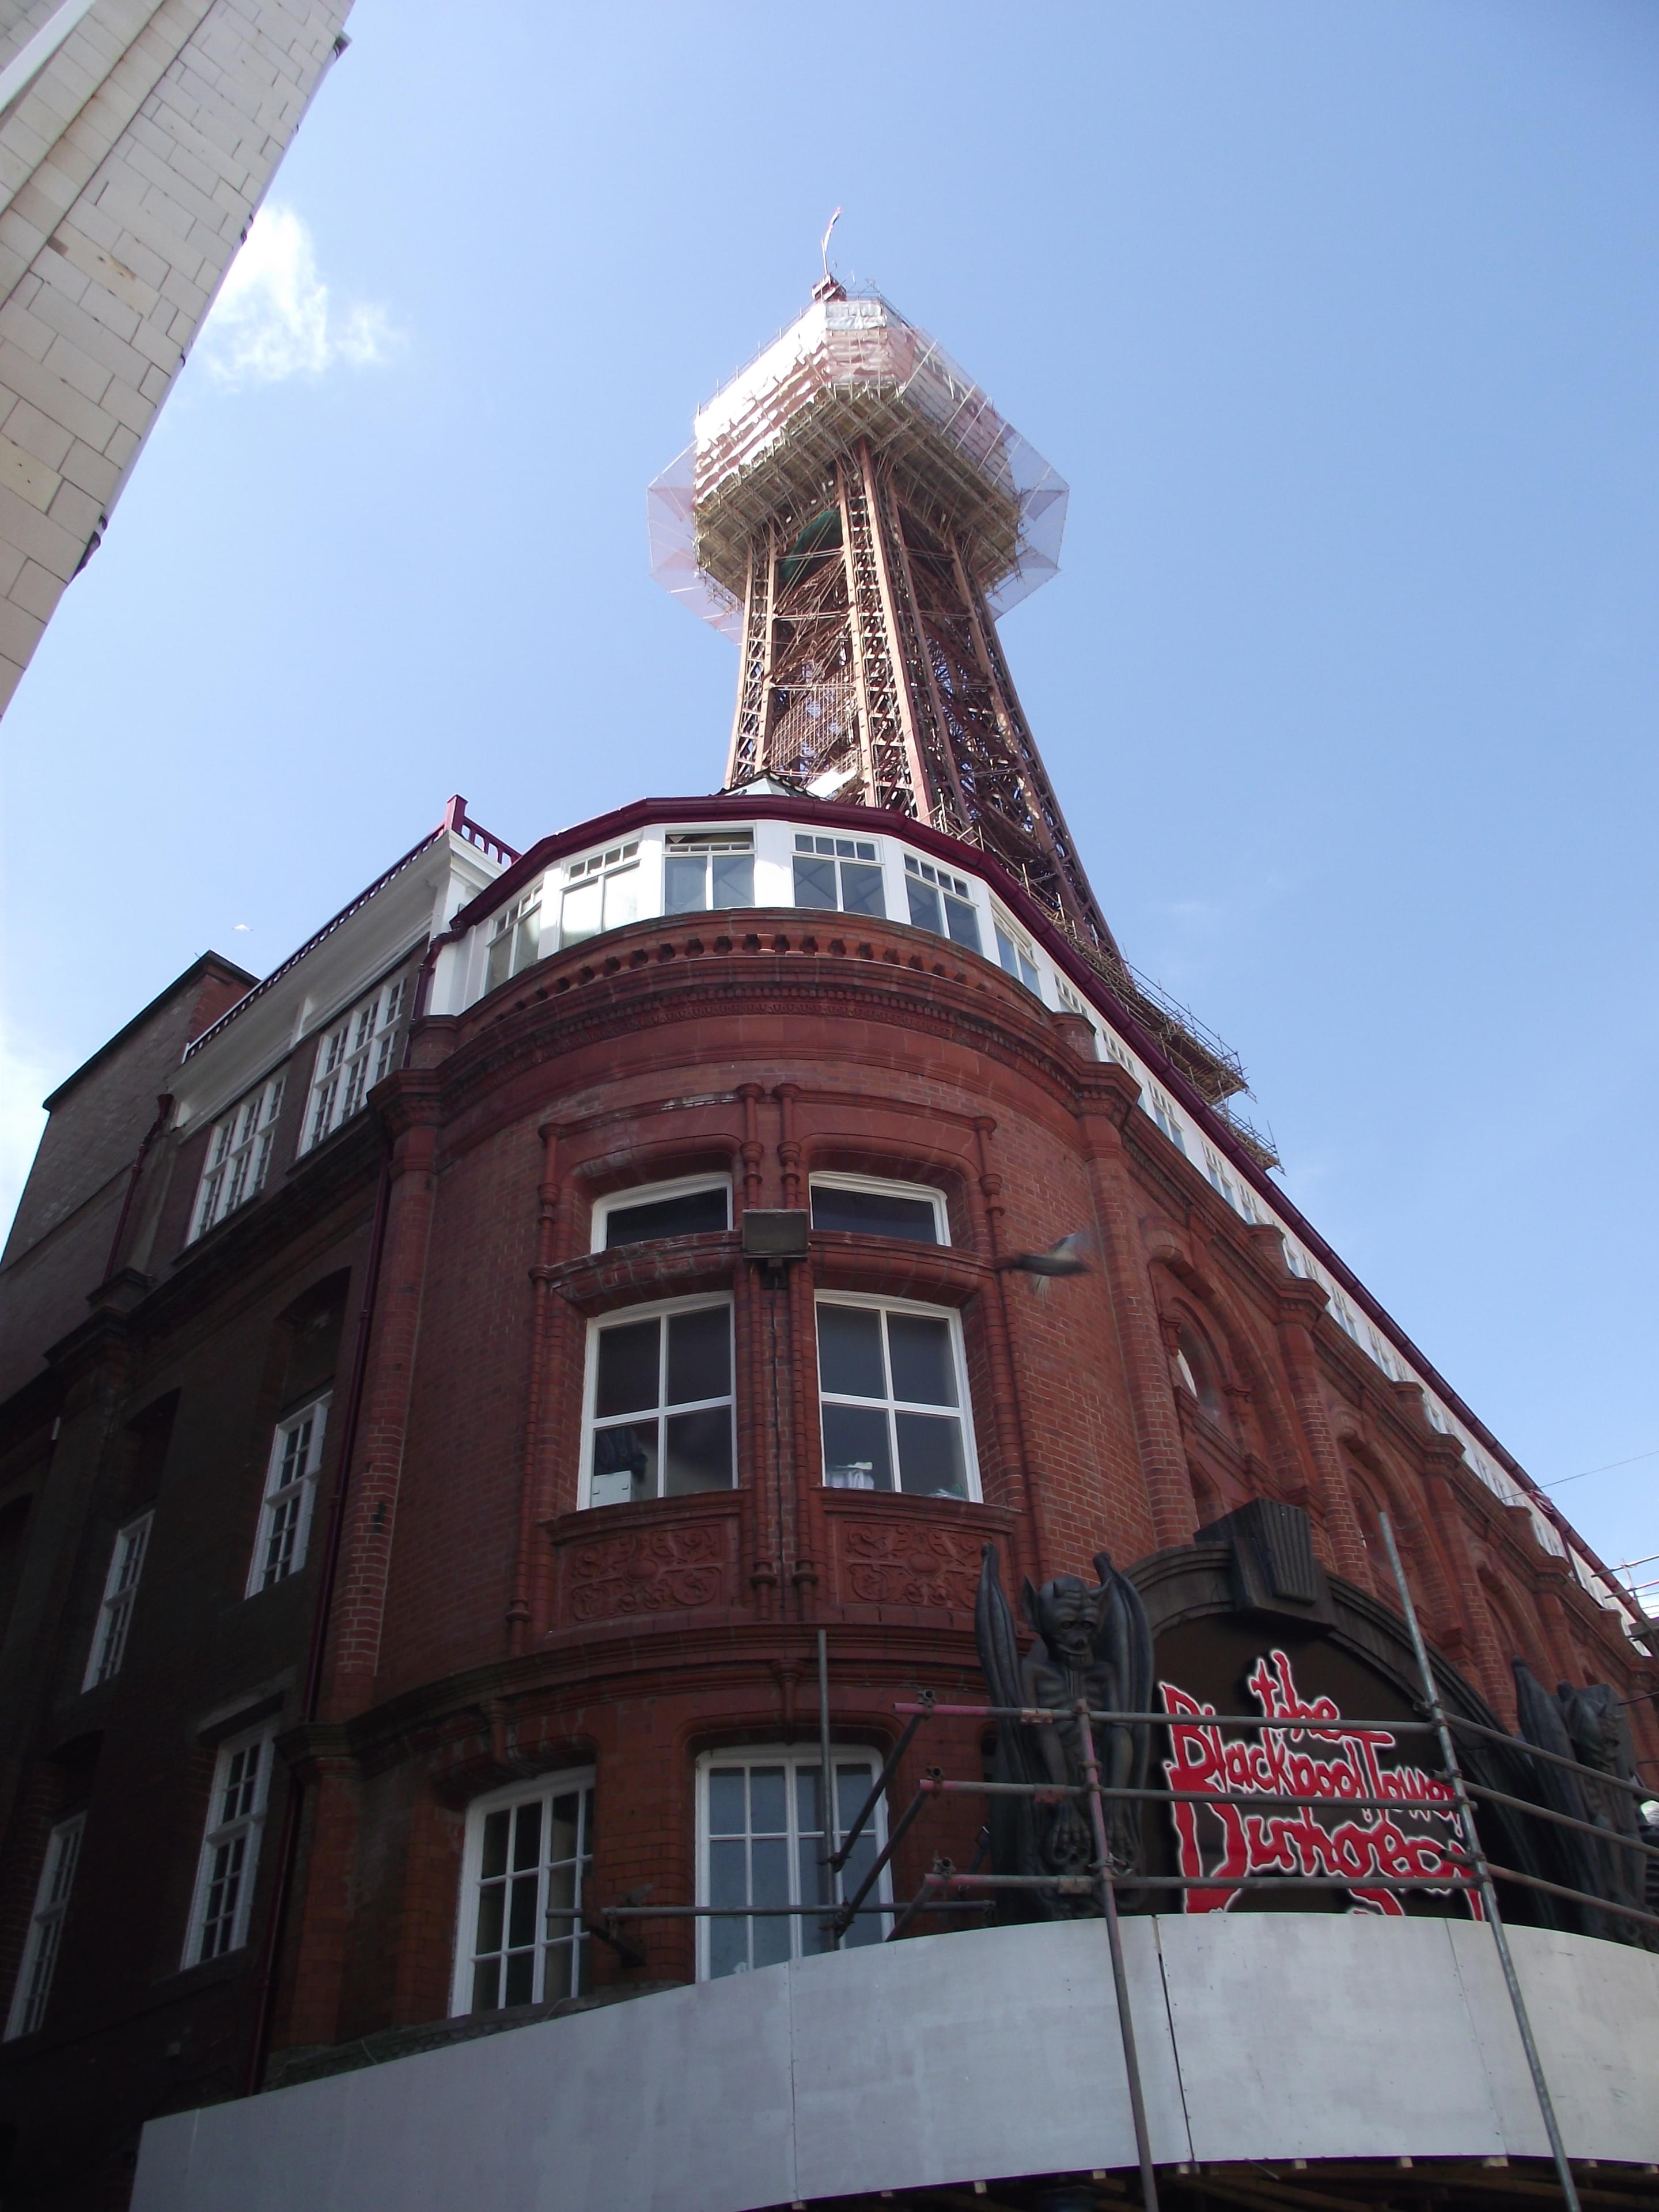 The Blackpool Tower Dungeon Overview